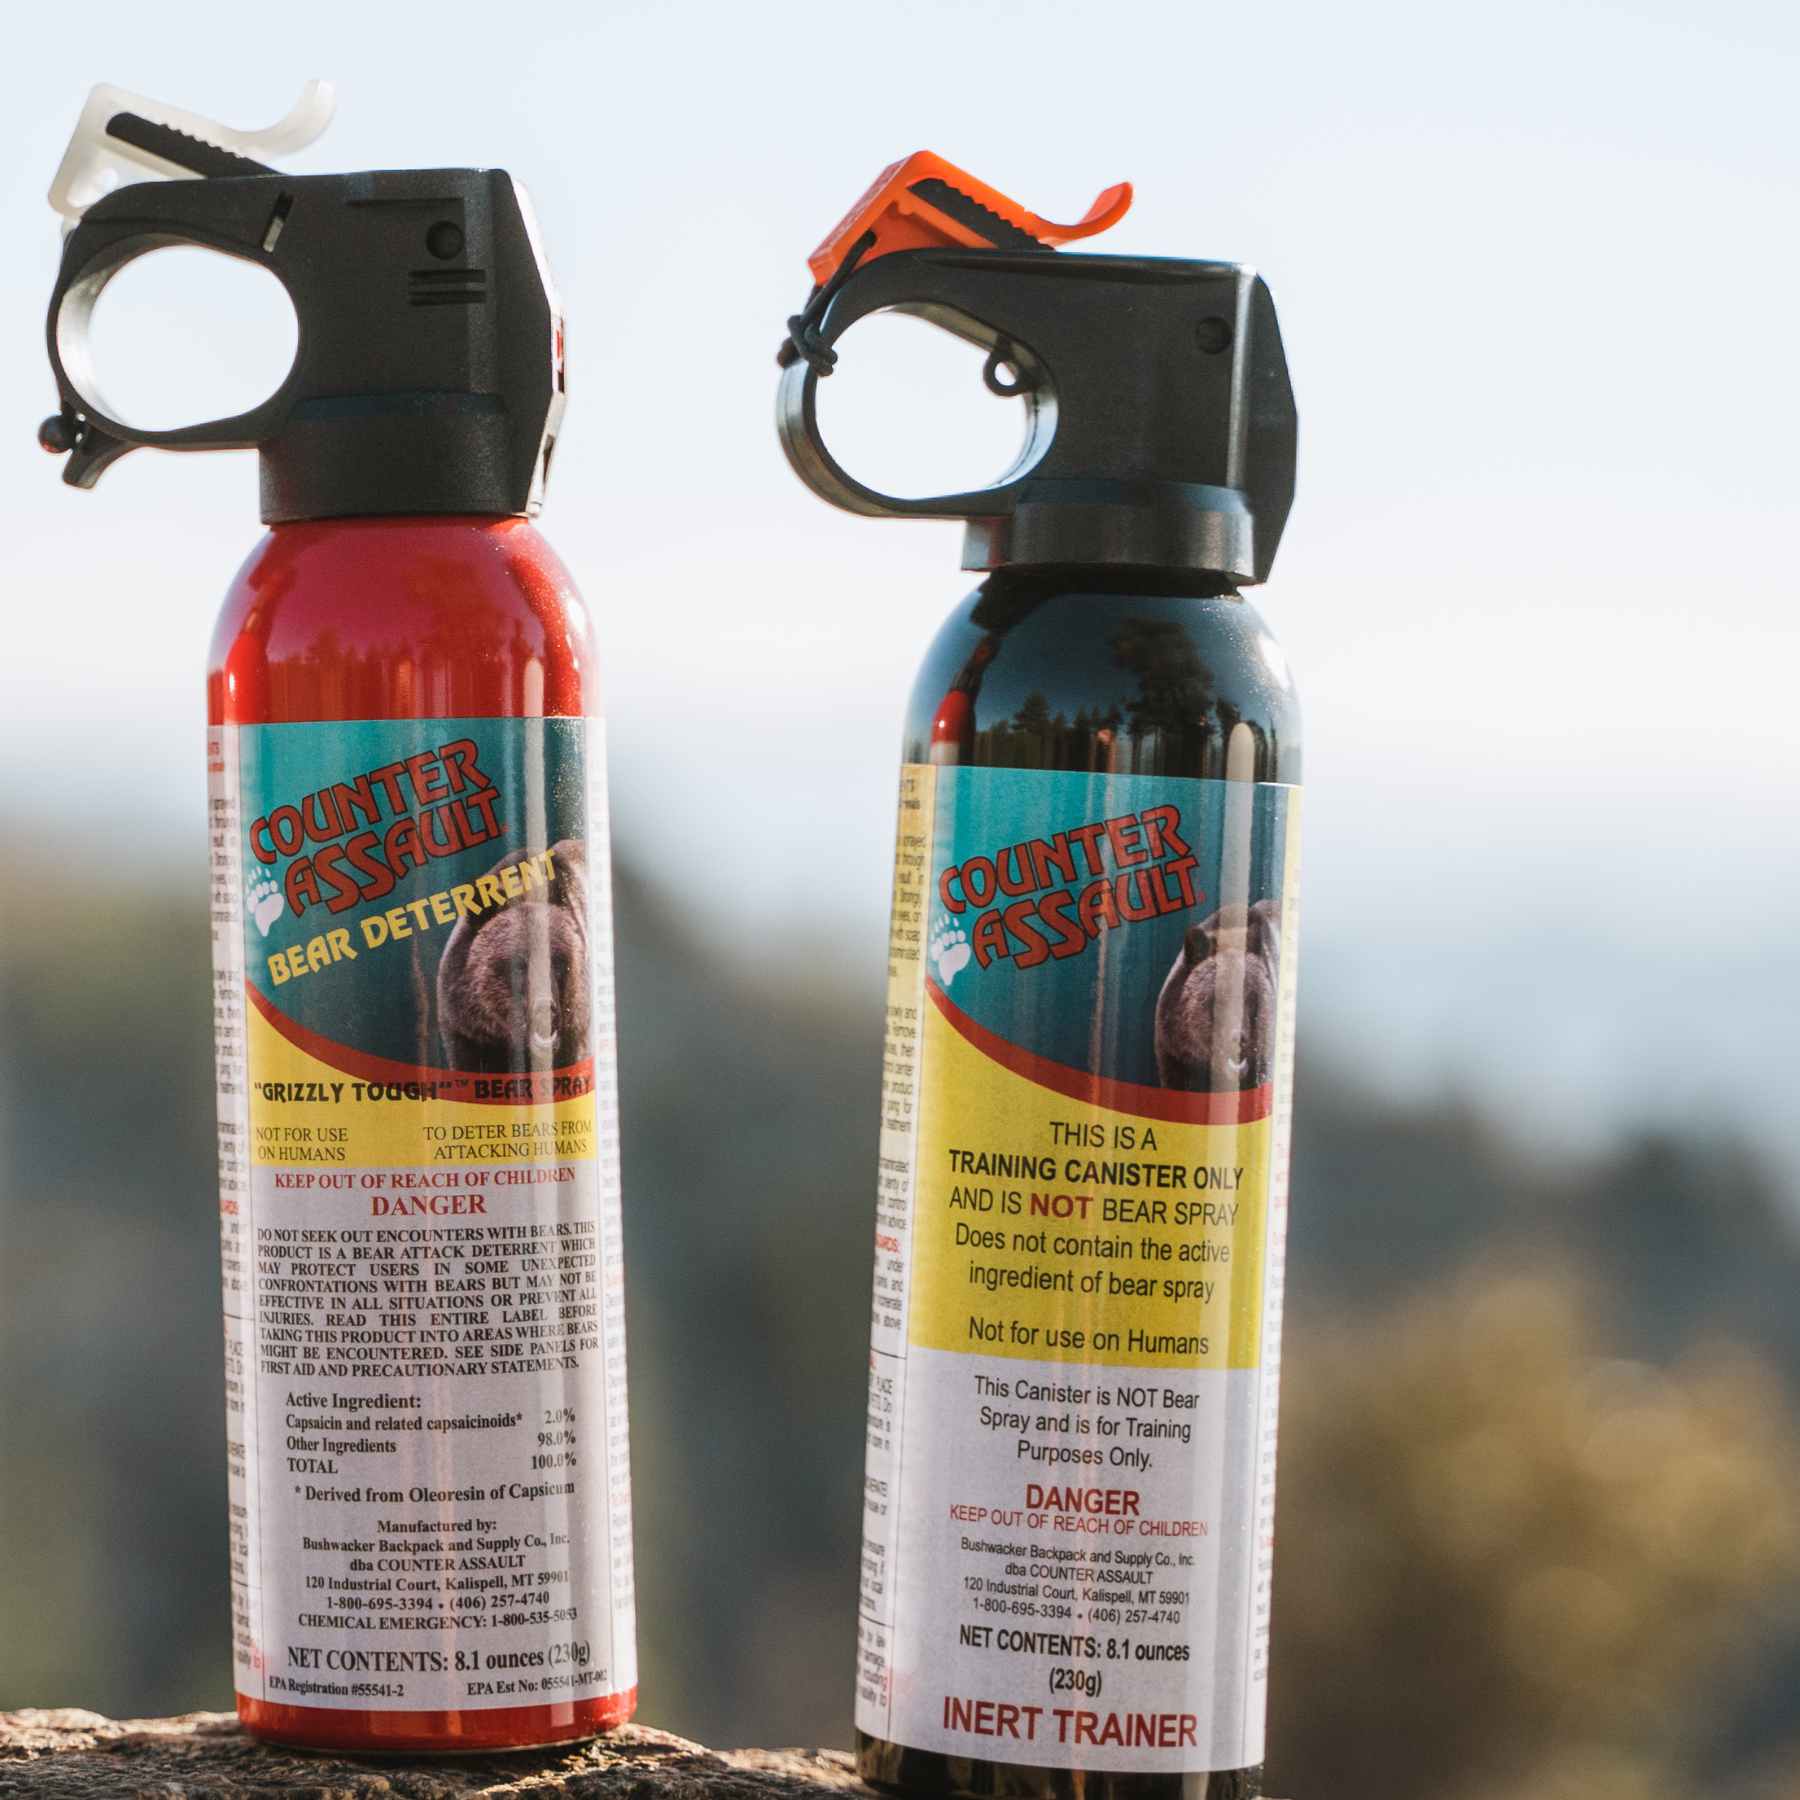 A training canister and a Counter Assault bear deterrent spray